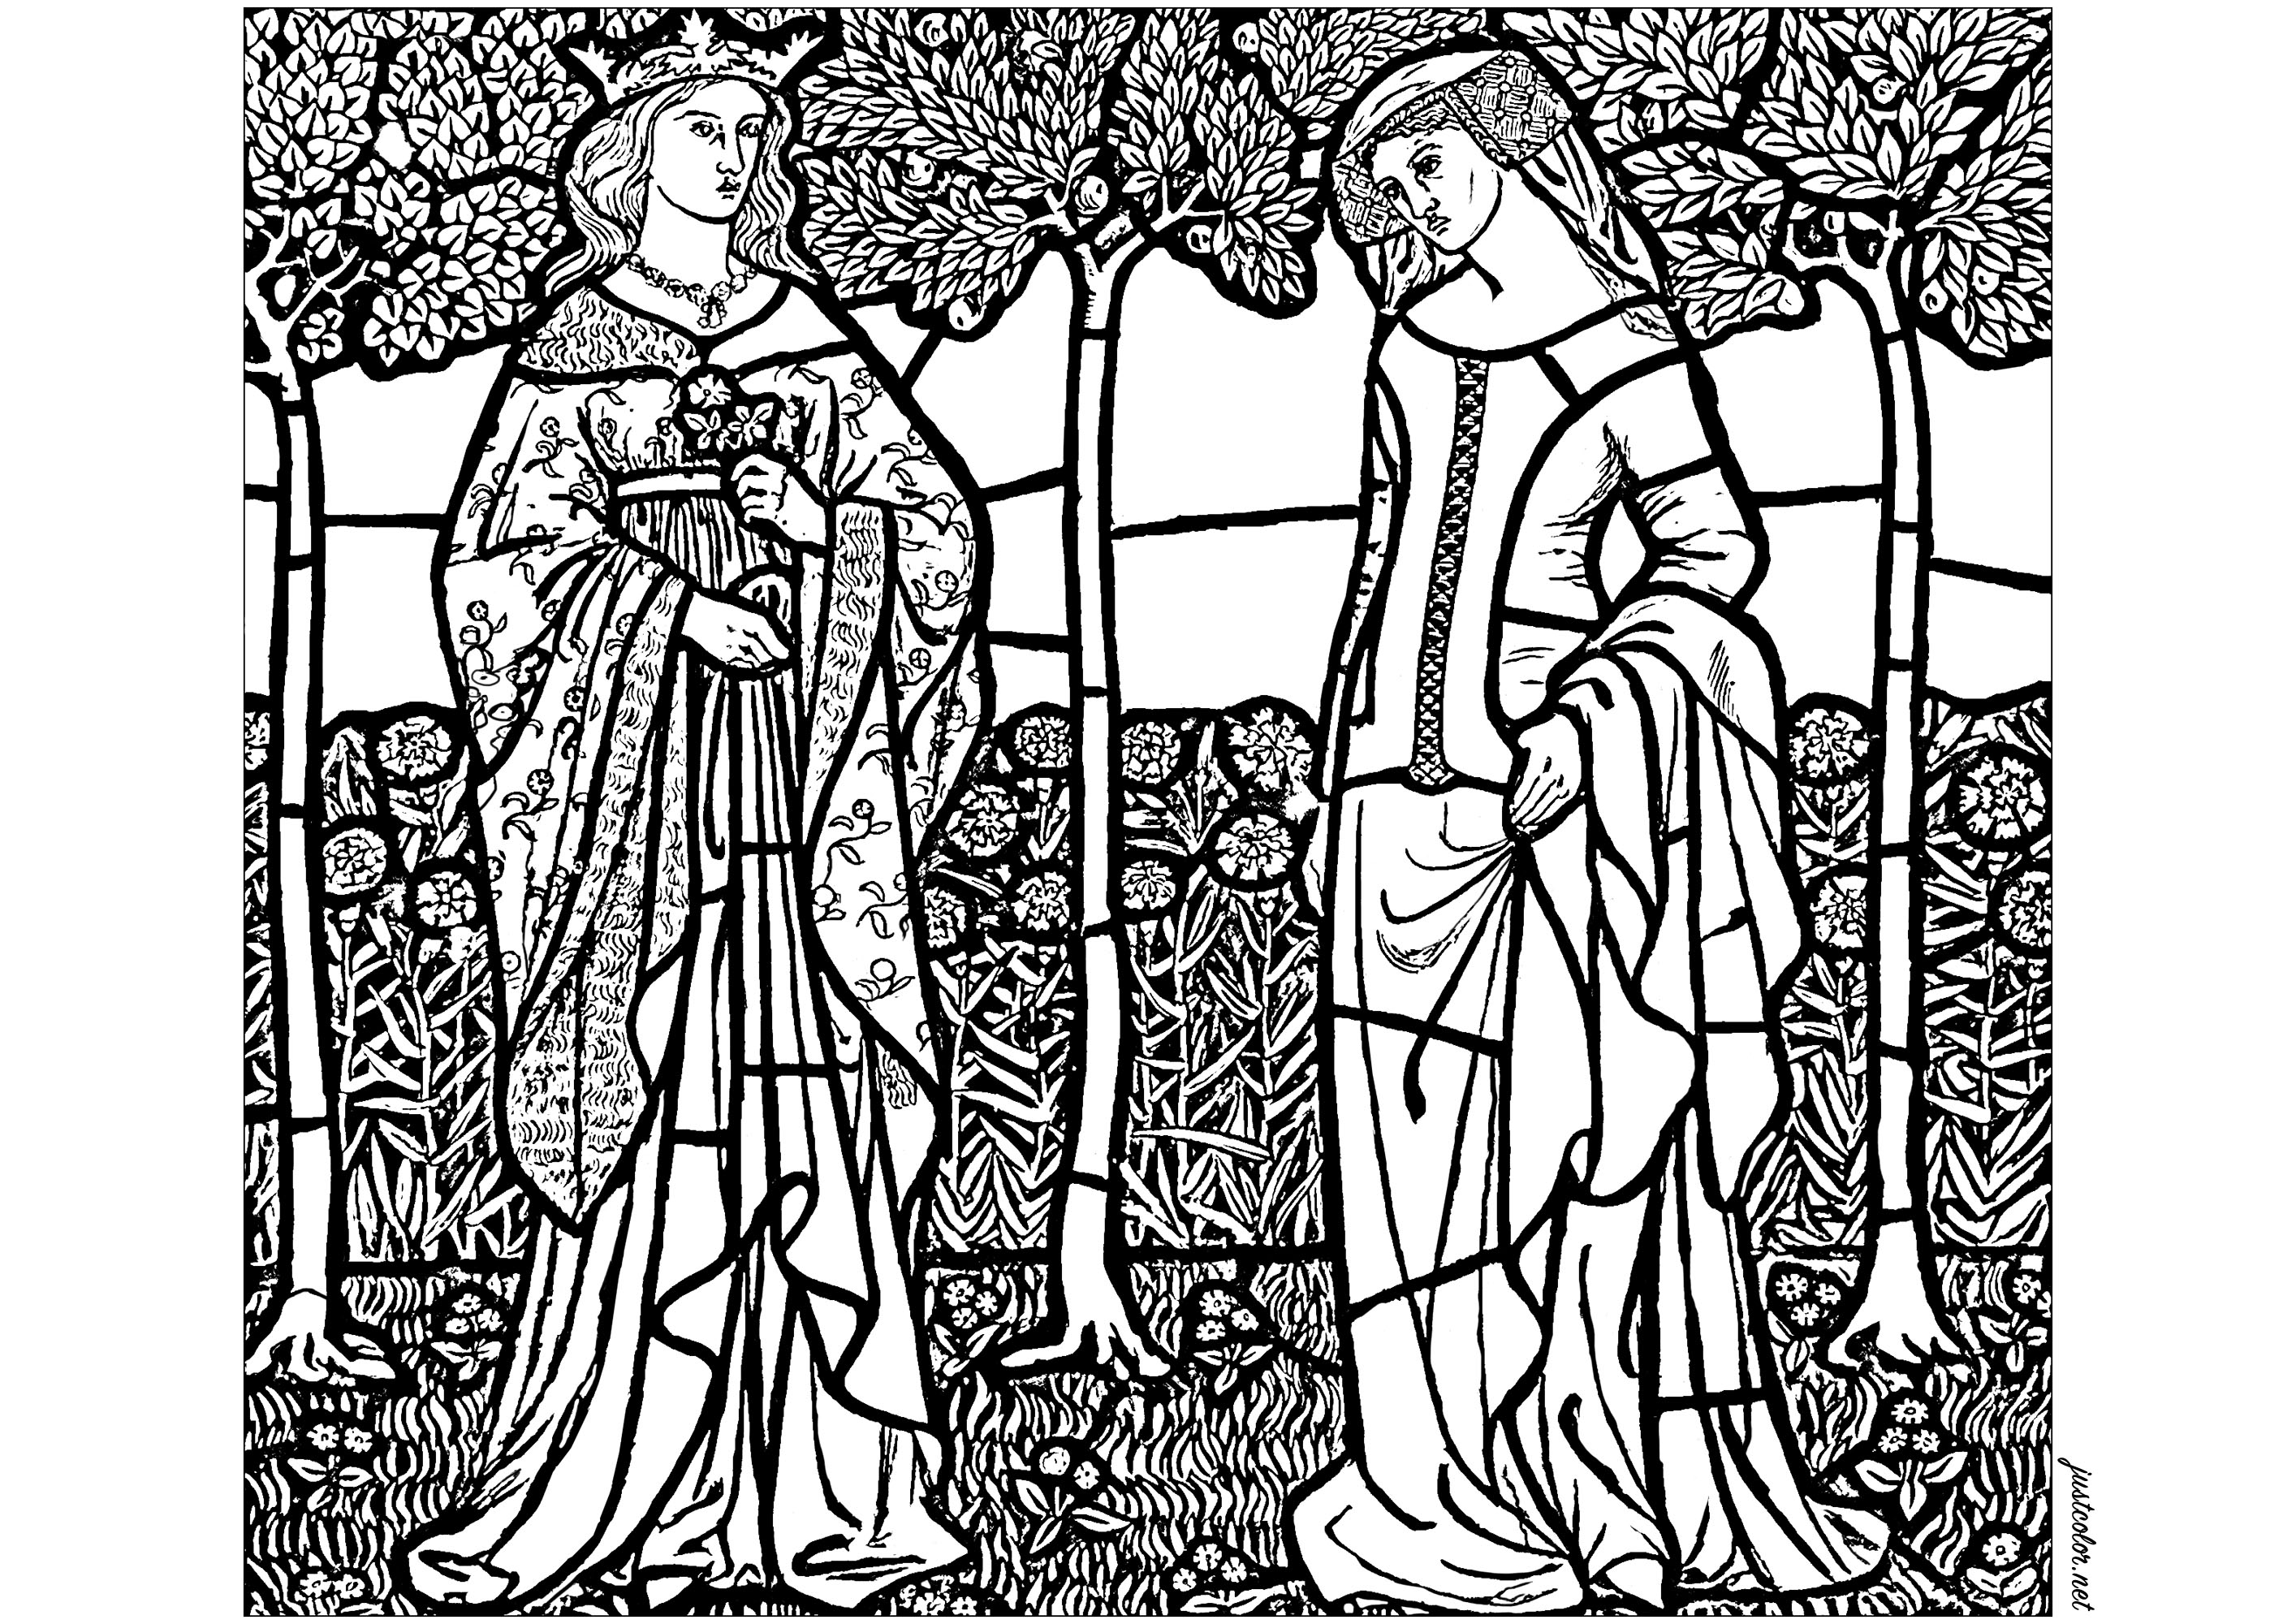 Coloring page created from a preparatory drawing by William Morris for a stained glass window depicting Guenièvre and Iseult (1858)